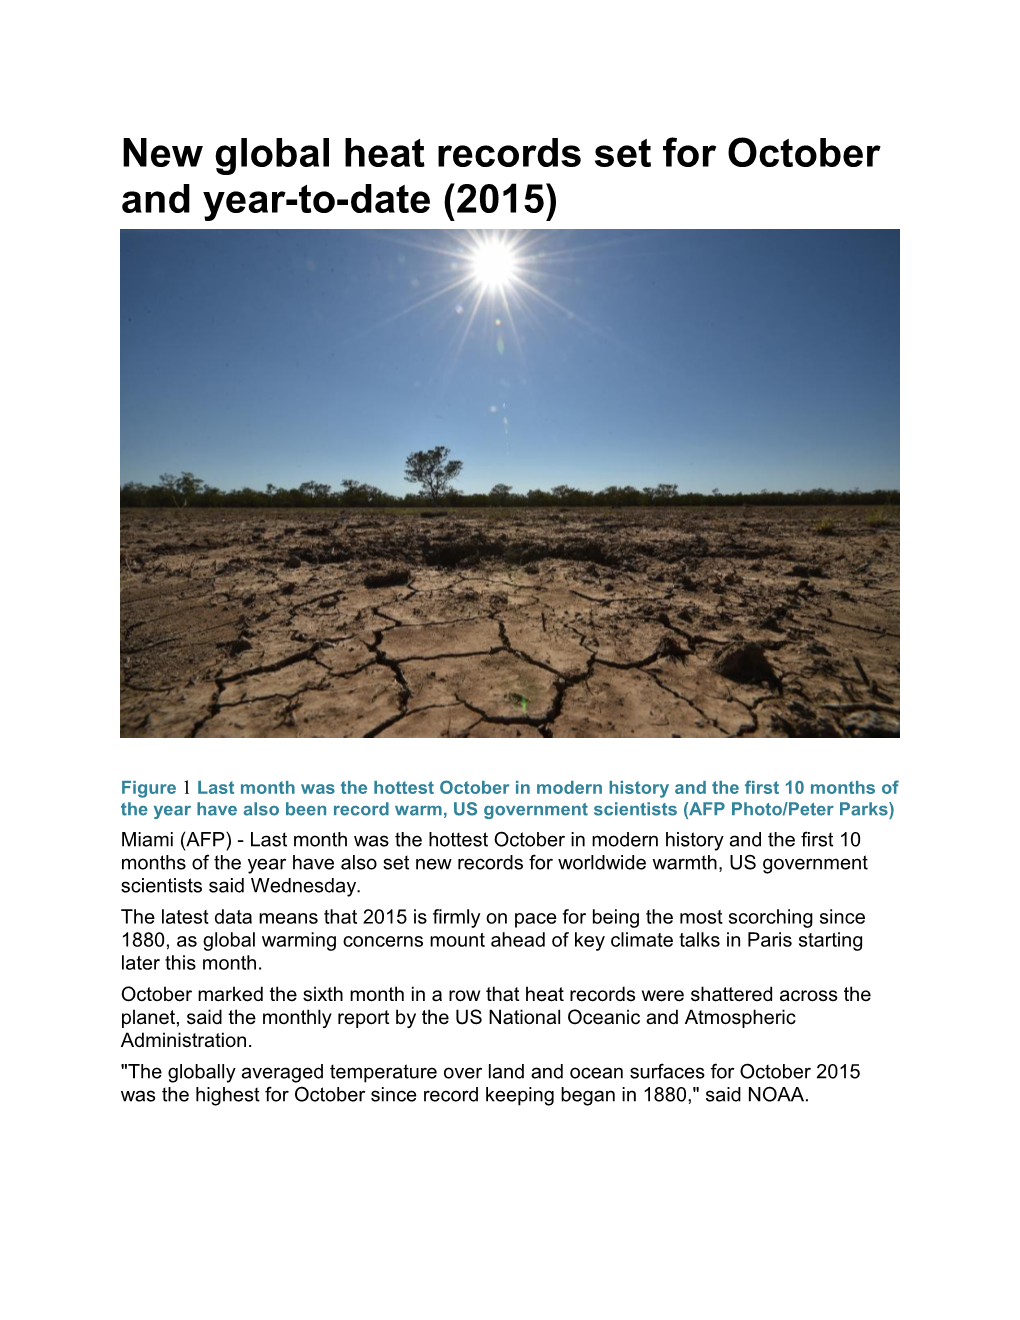 New Global Heat Records Set for October and Year-To-Date (2015)